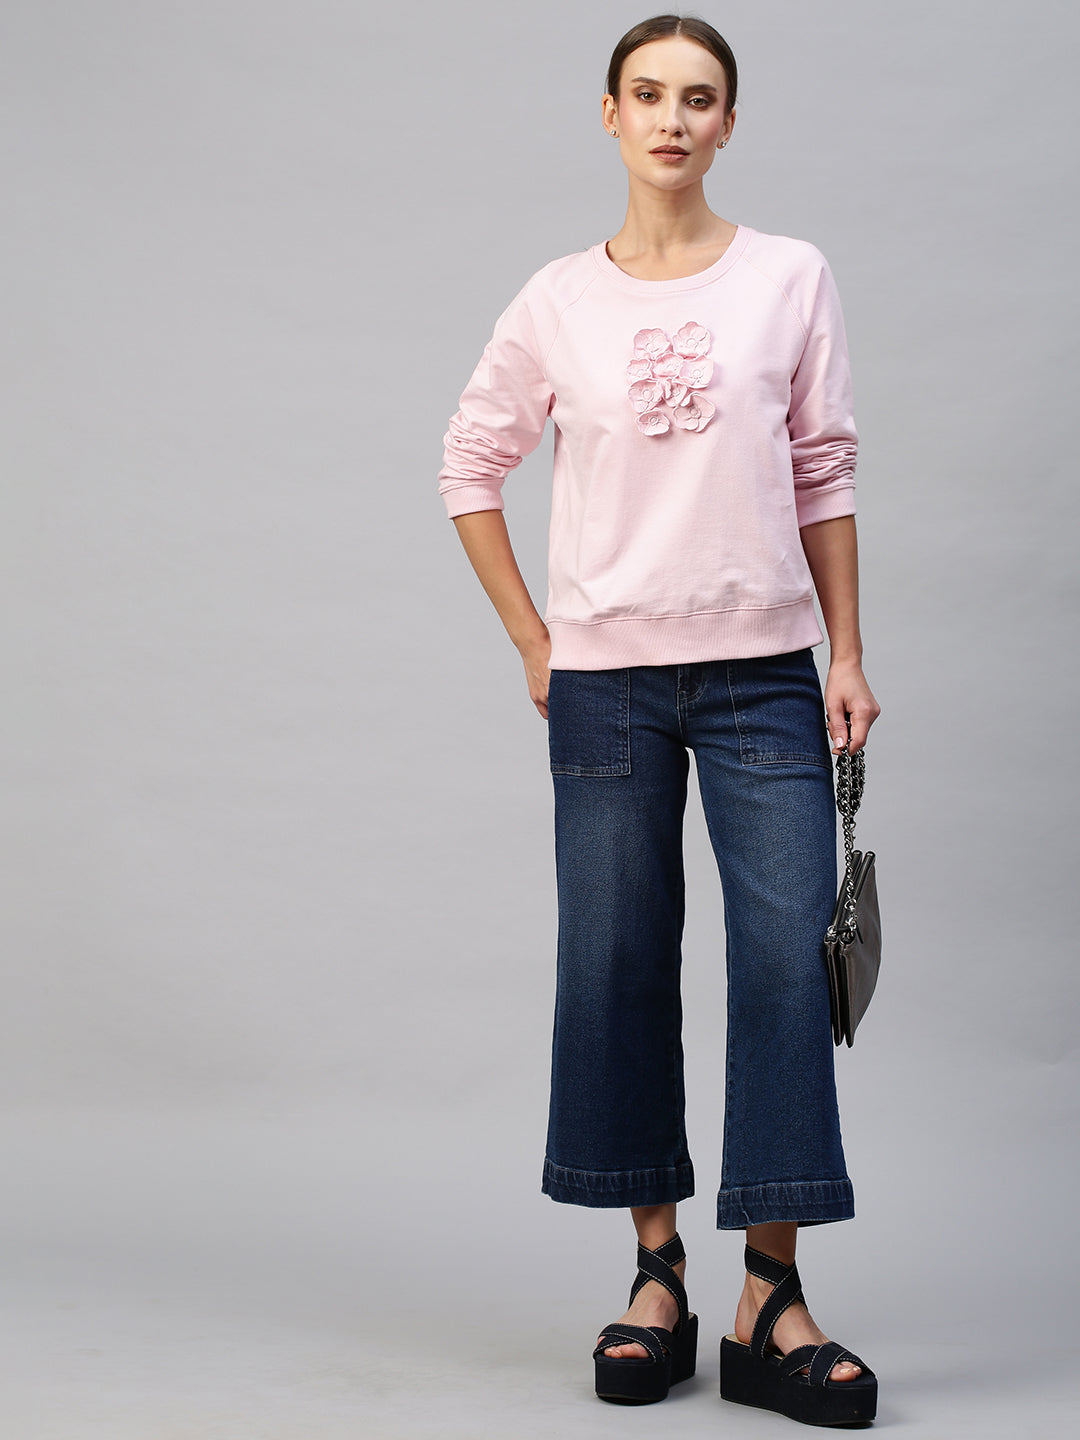 French Terry Raglan Sleeved Sweatshirt With Applique Flowers